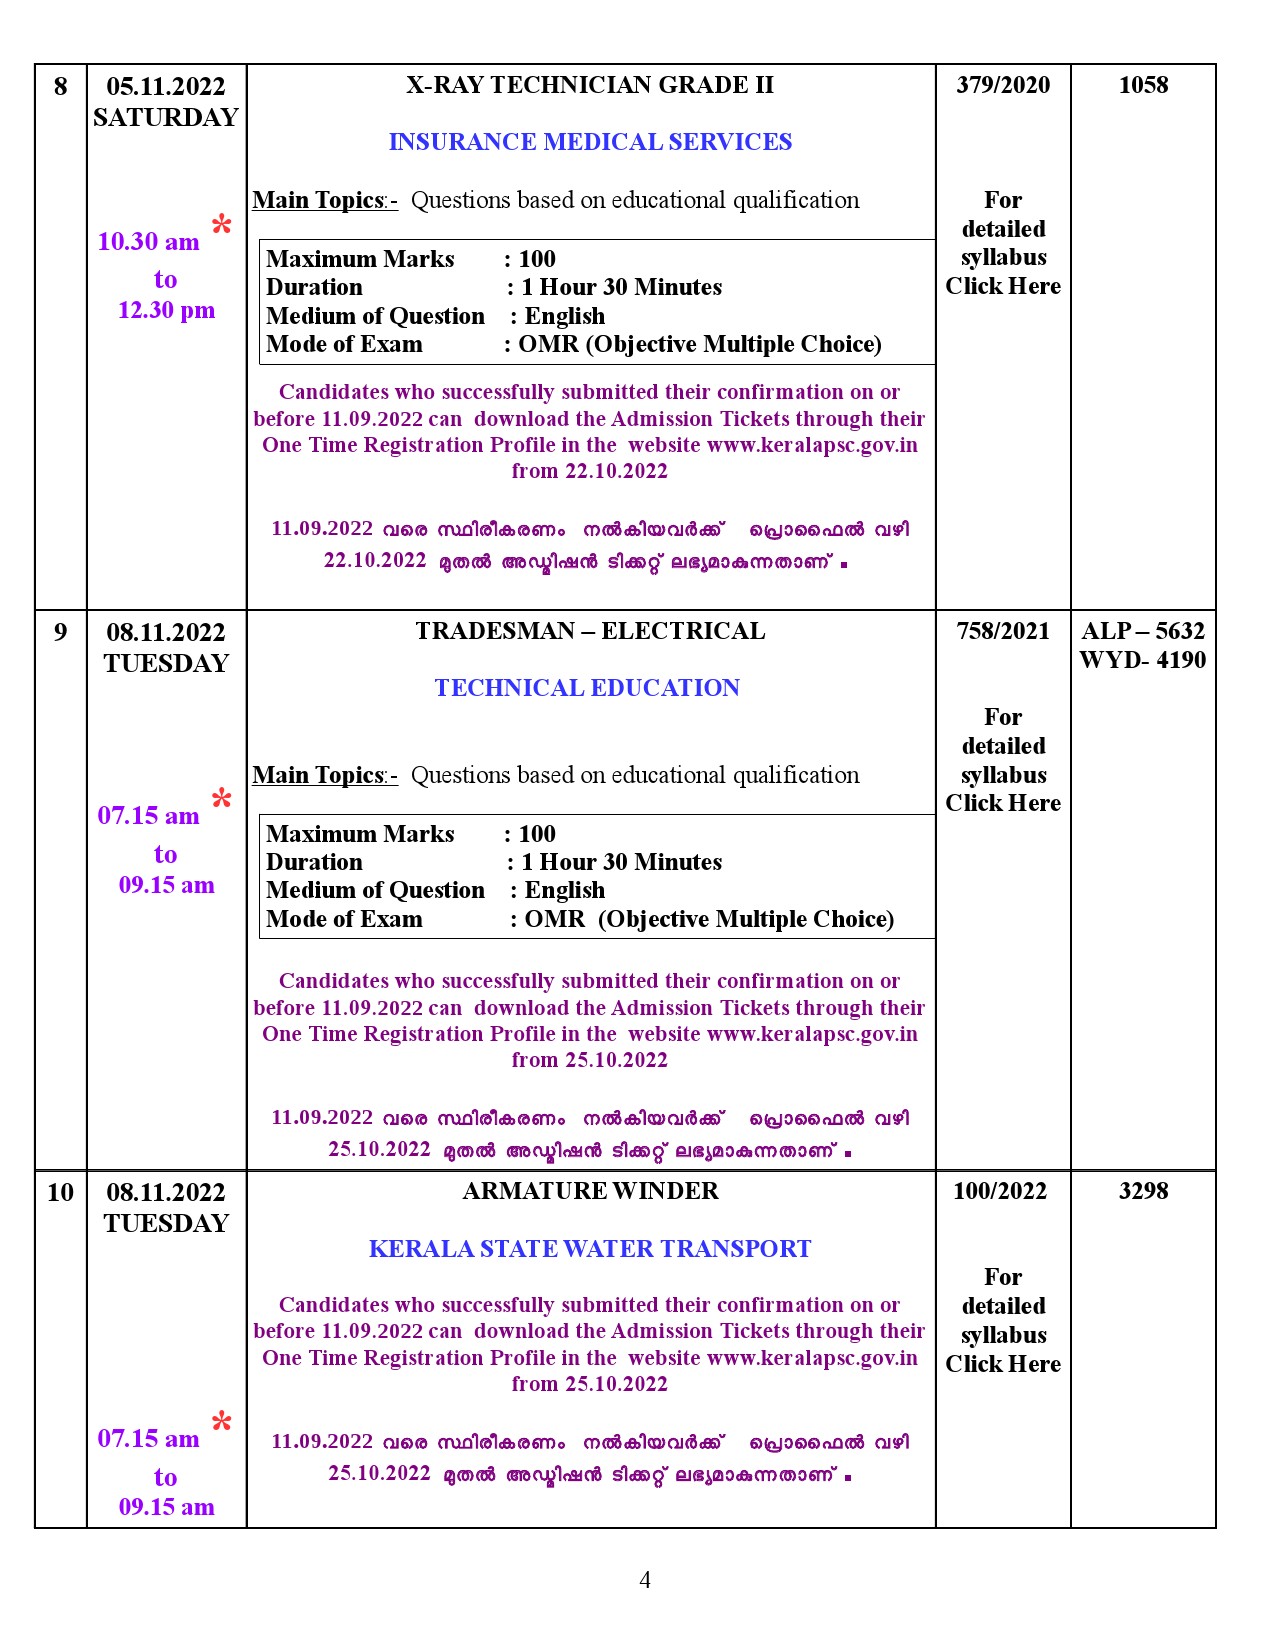 EXAMINATION PROGRAMME FOR THE MONTH OF NOVEMBER 2022 AFTER CONFIRMATION - Notification Image 4